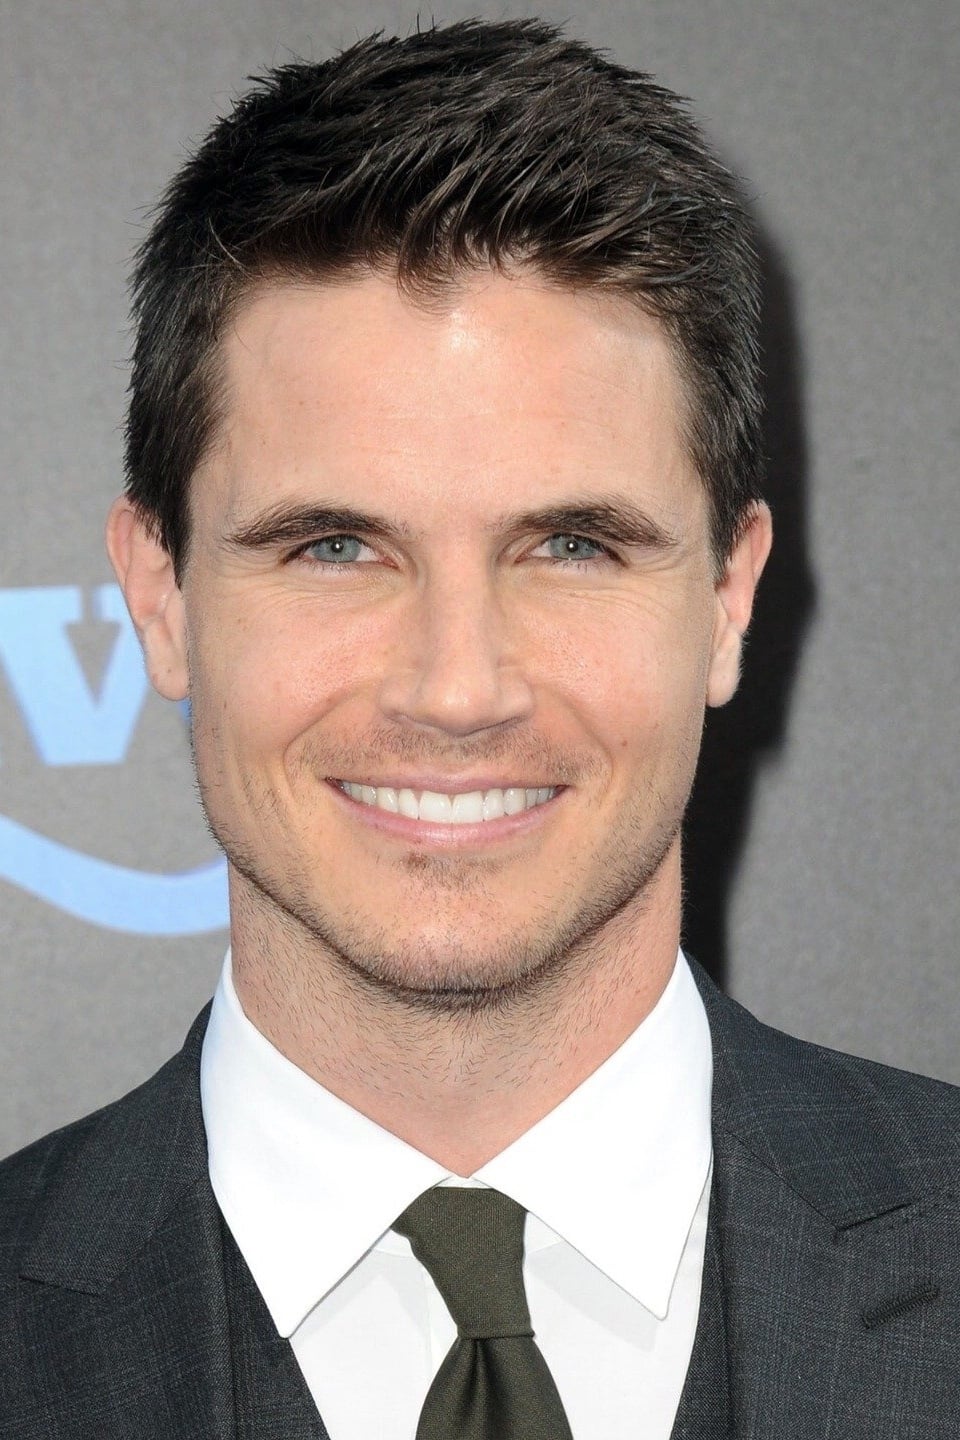 Robbie Amell - Attore